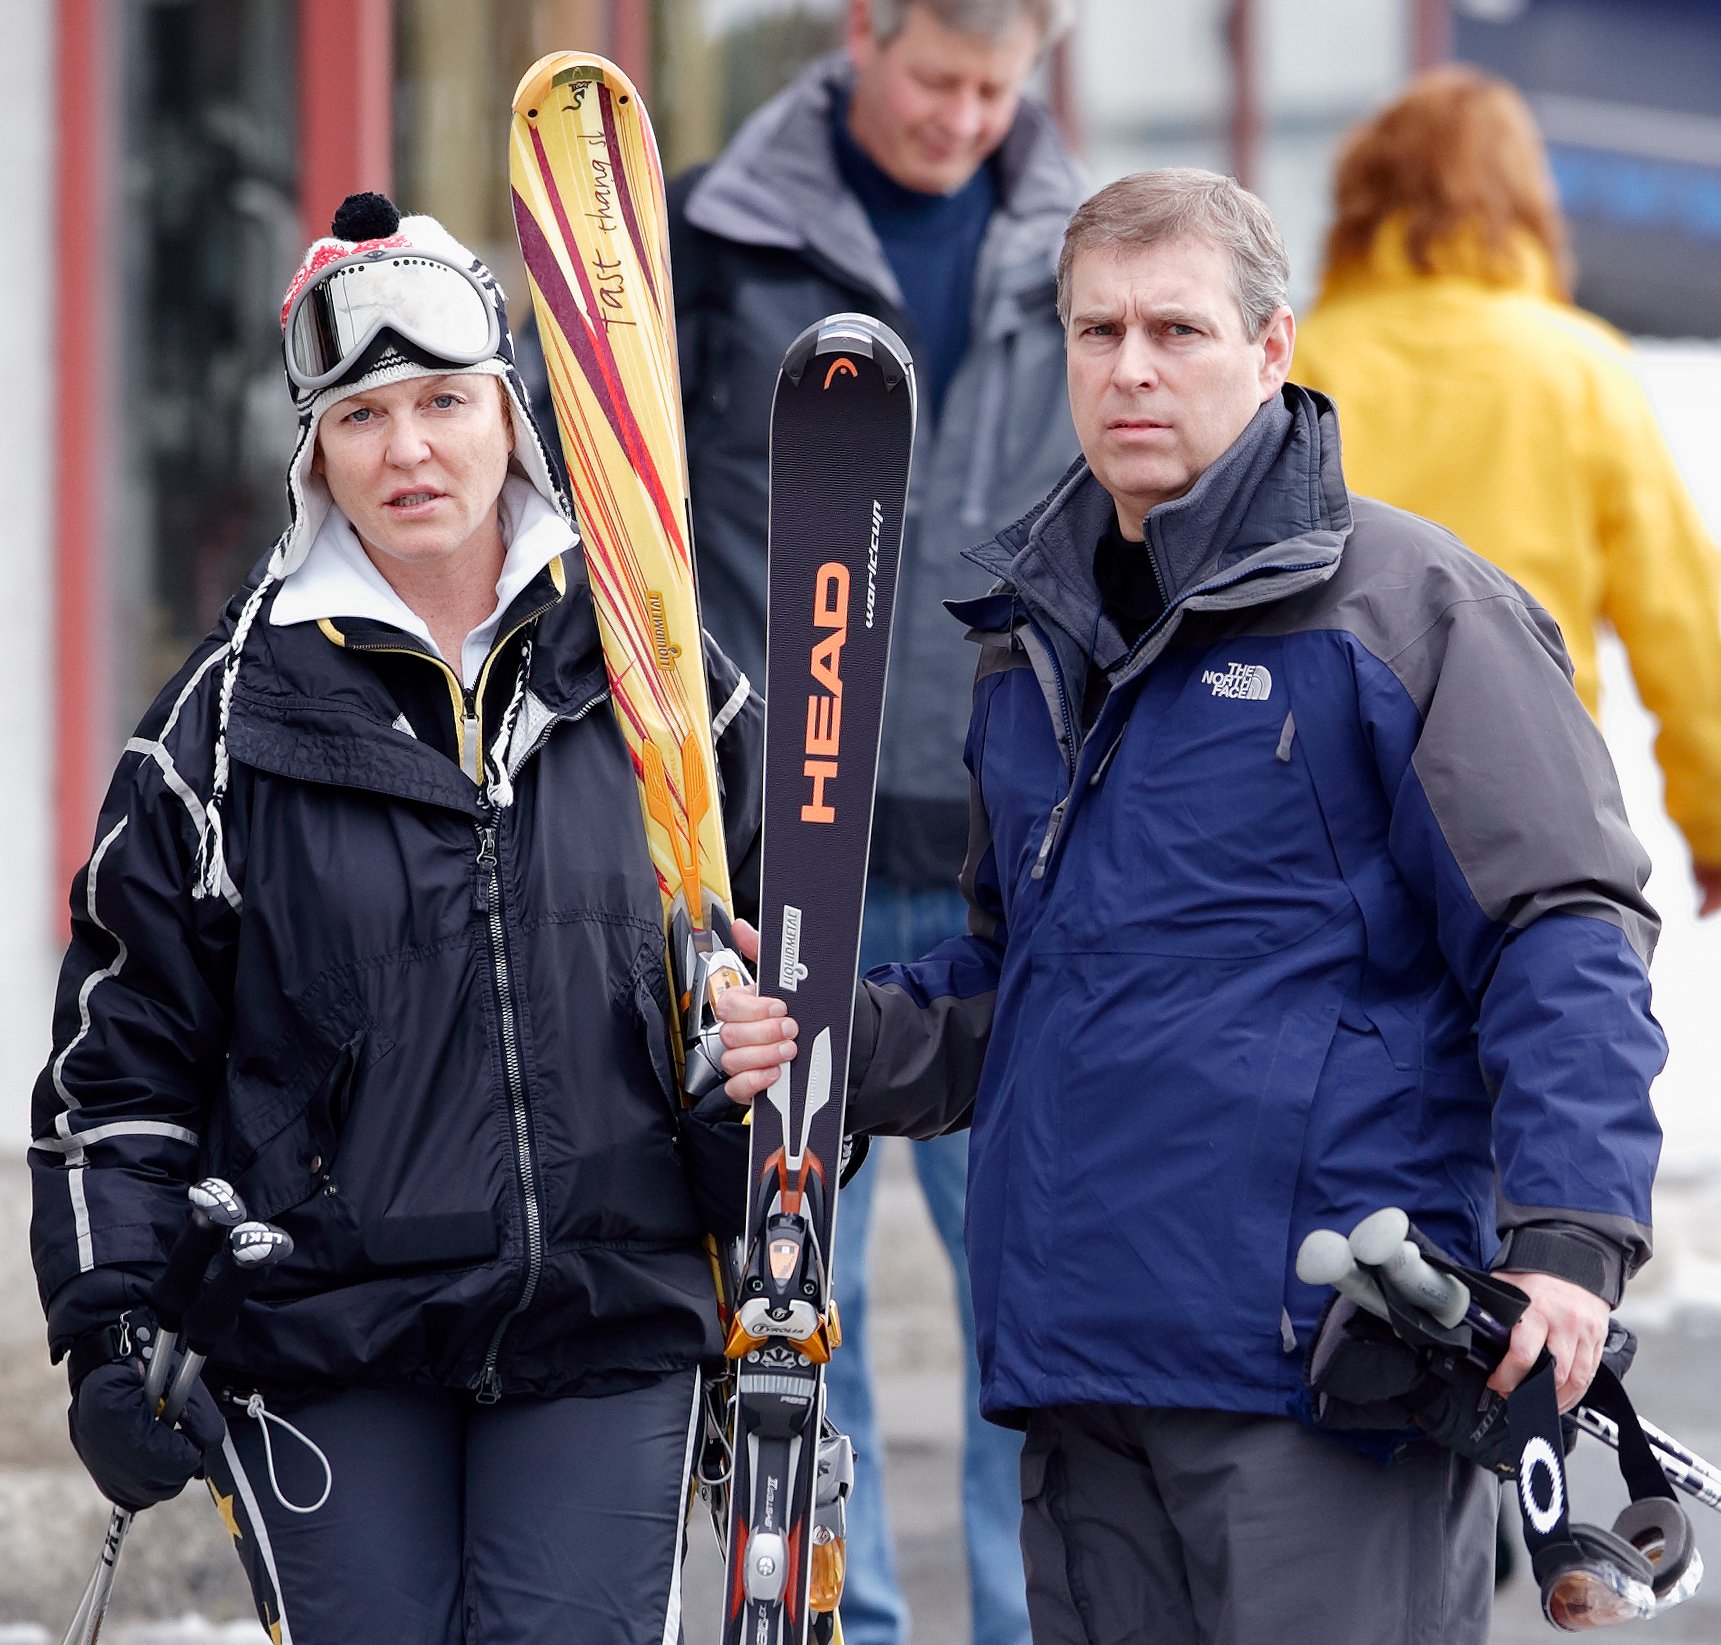 Sarah Ferguson and Prince Andrew standing next to one another during a skiing holiday